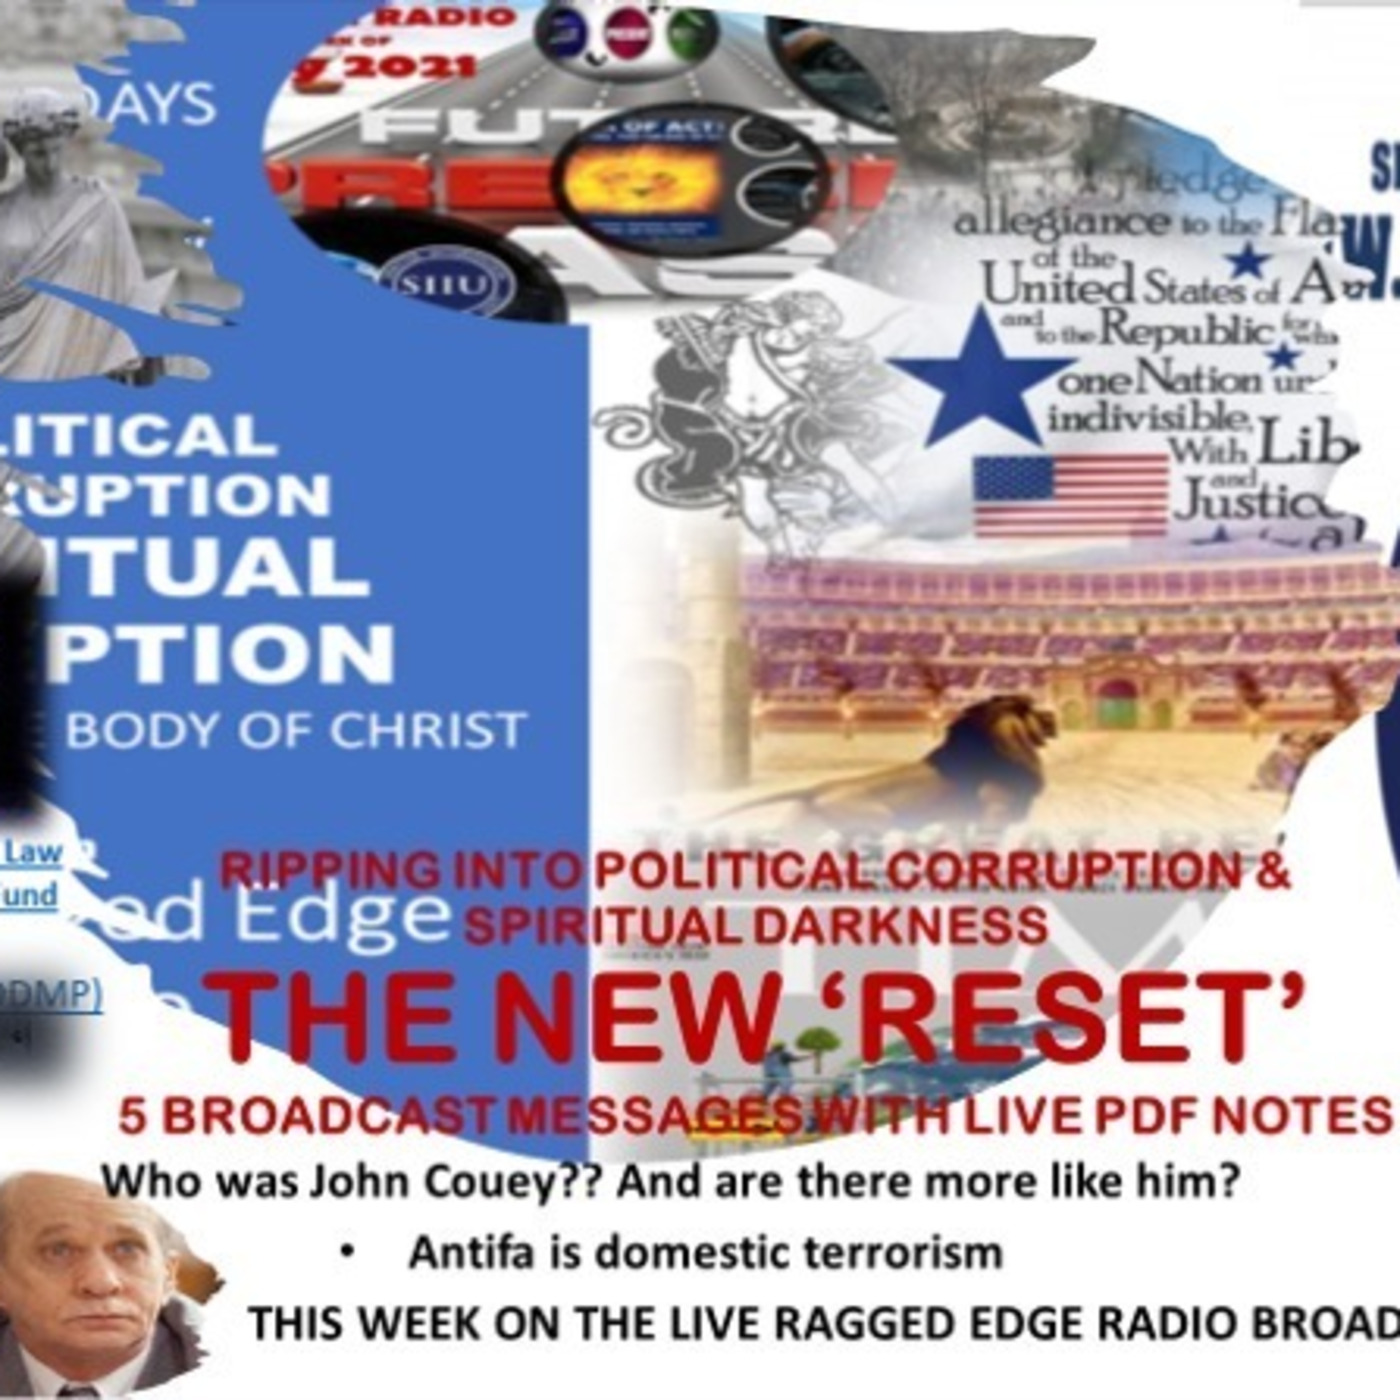 Episode 1628: RESET PART 5 A What the global intellectuals are saying